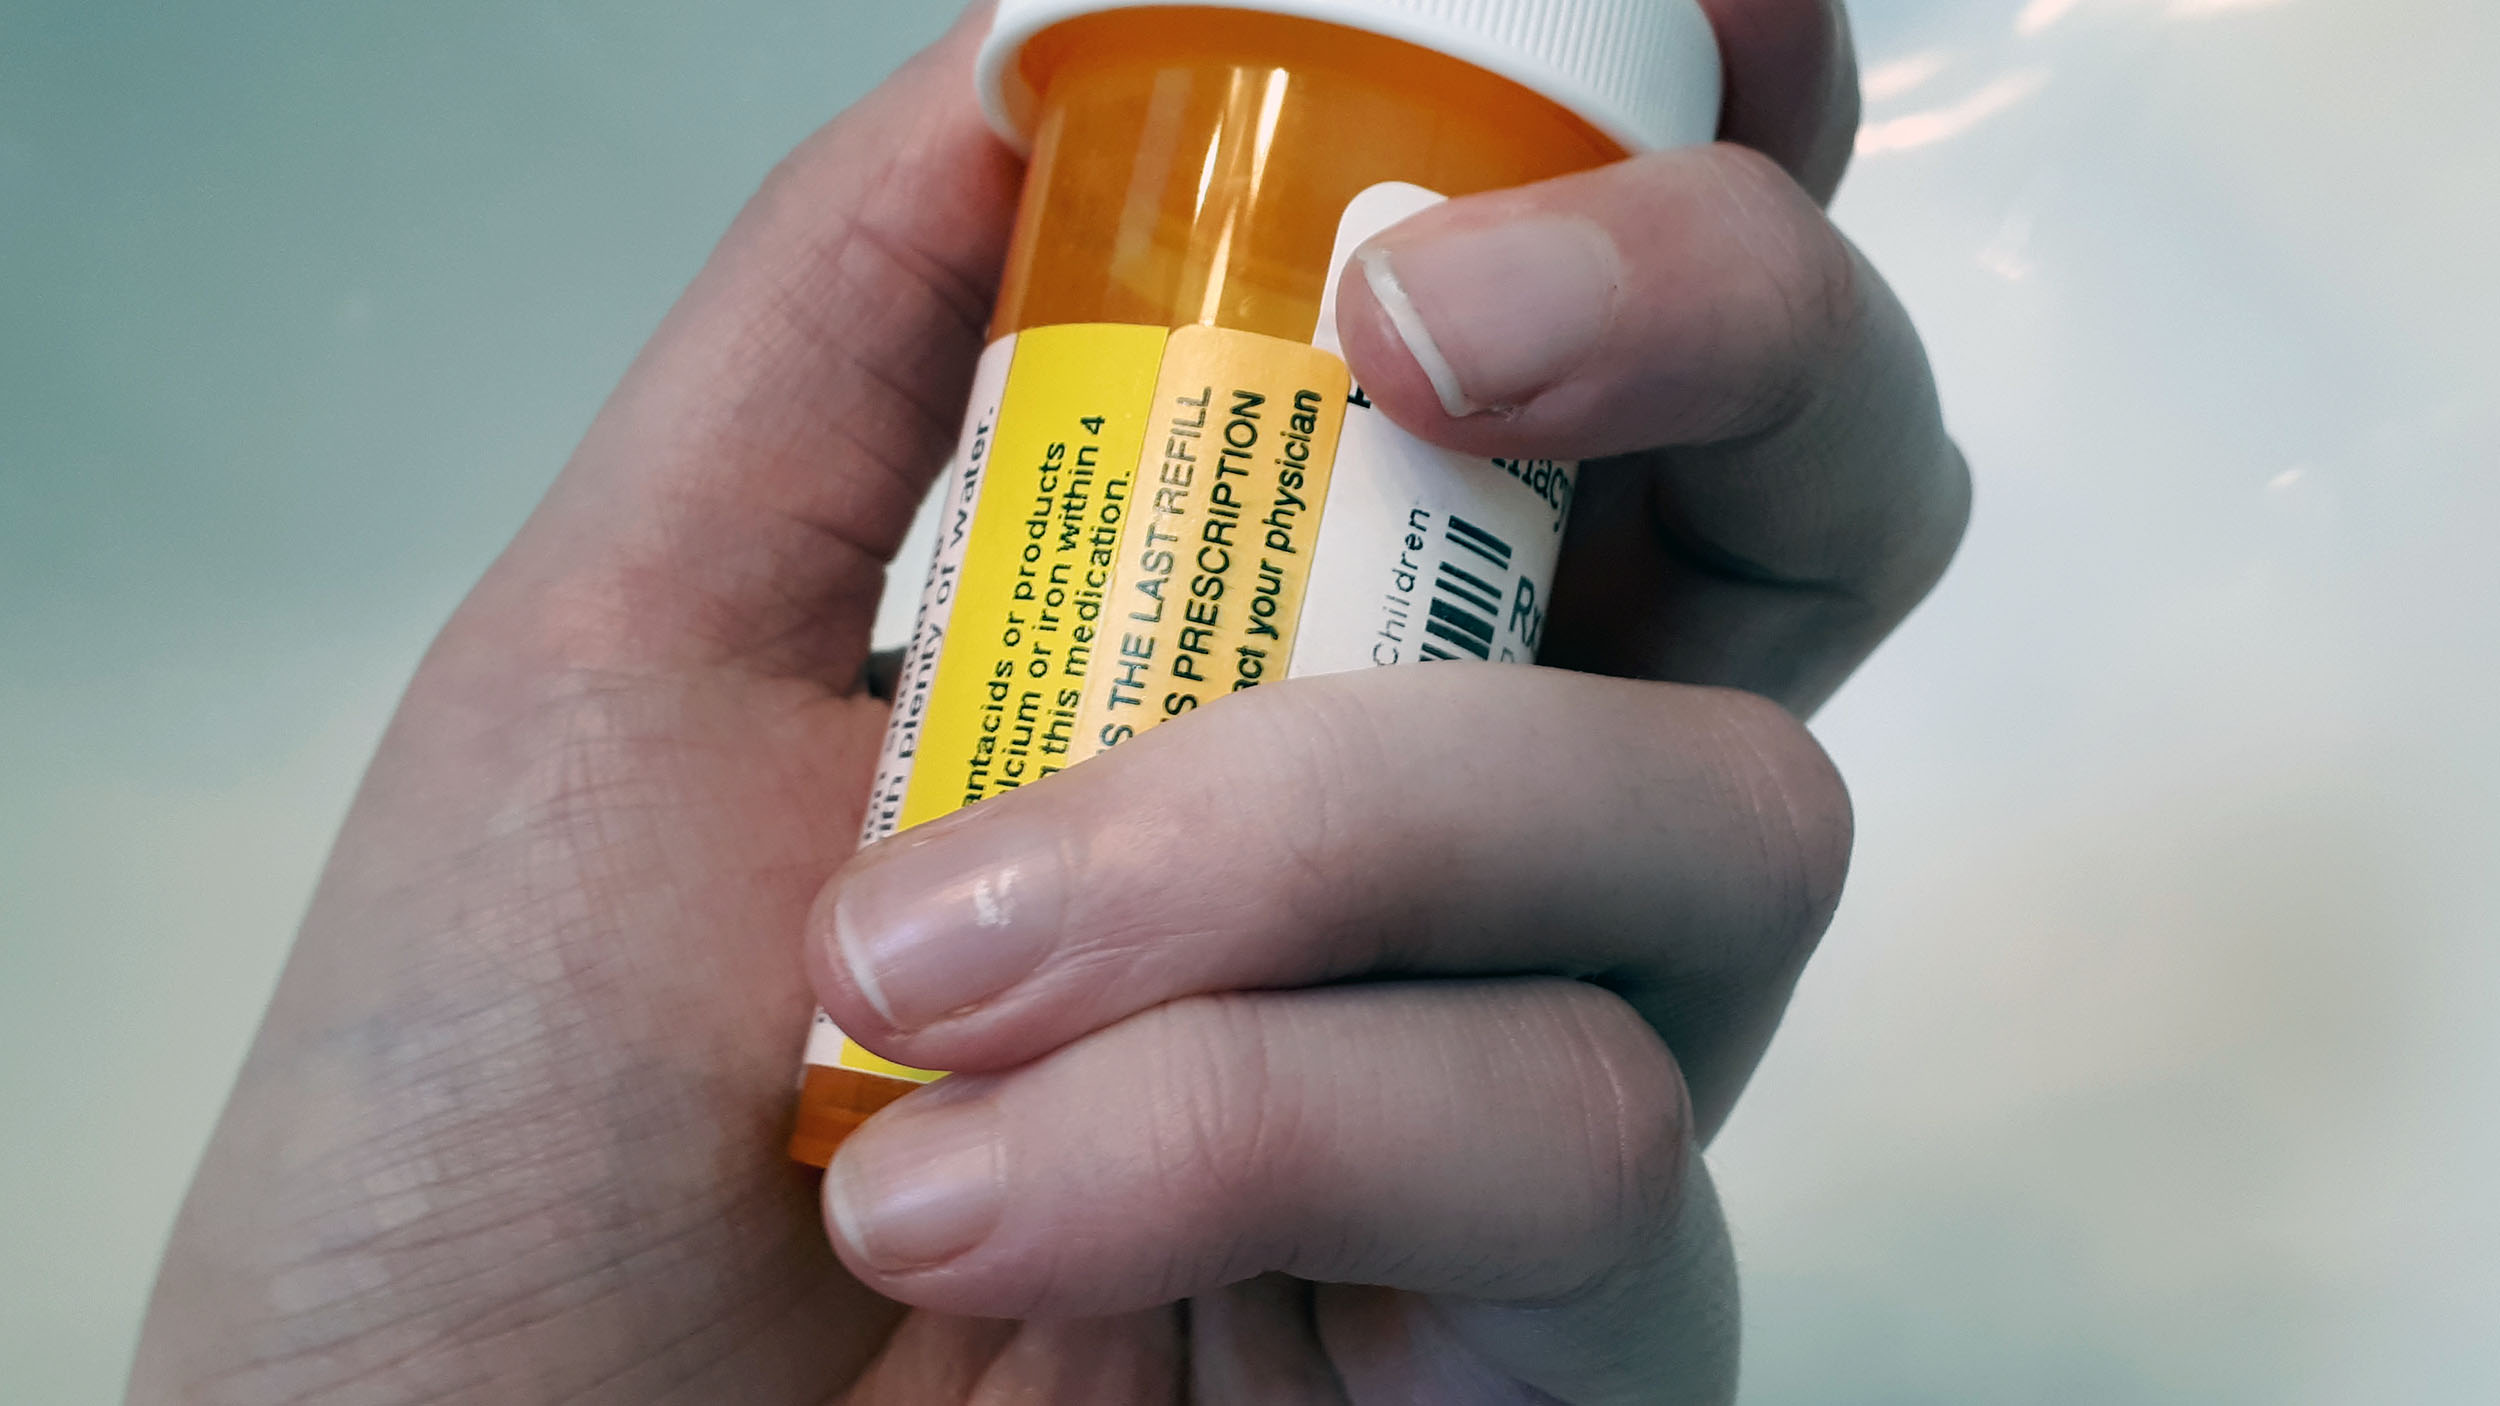 A hand holding a prescription bottle with a label asking the patient to contact their physician for a refill.